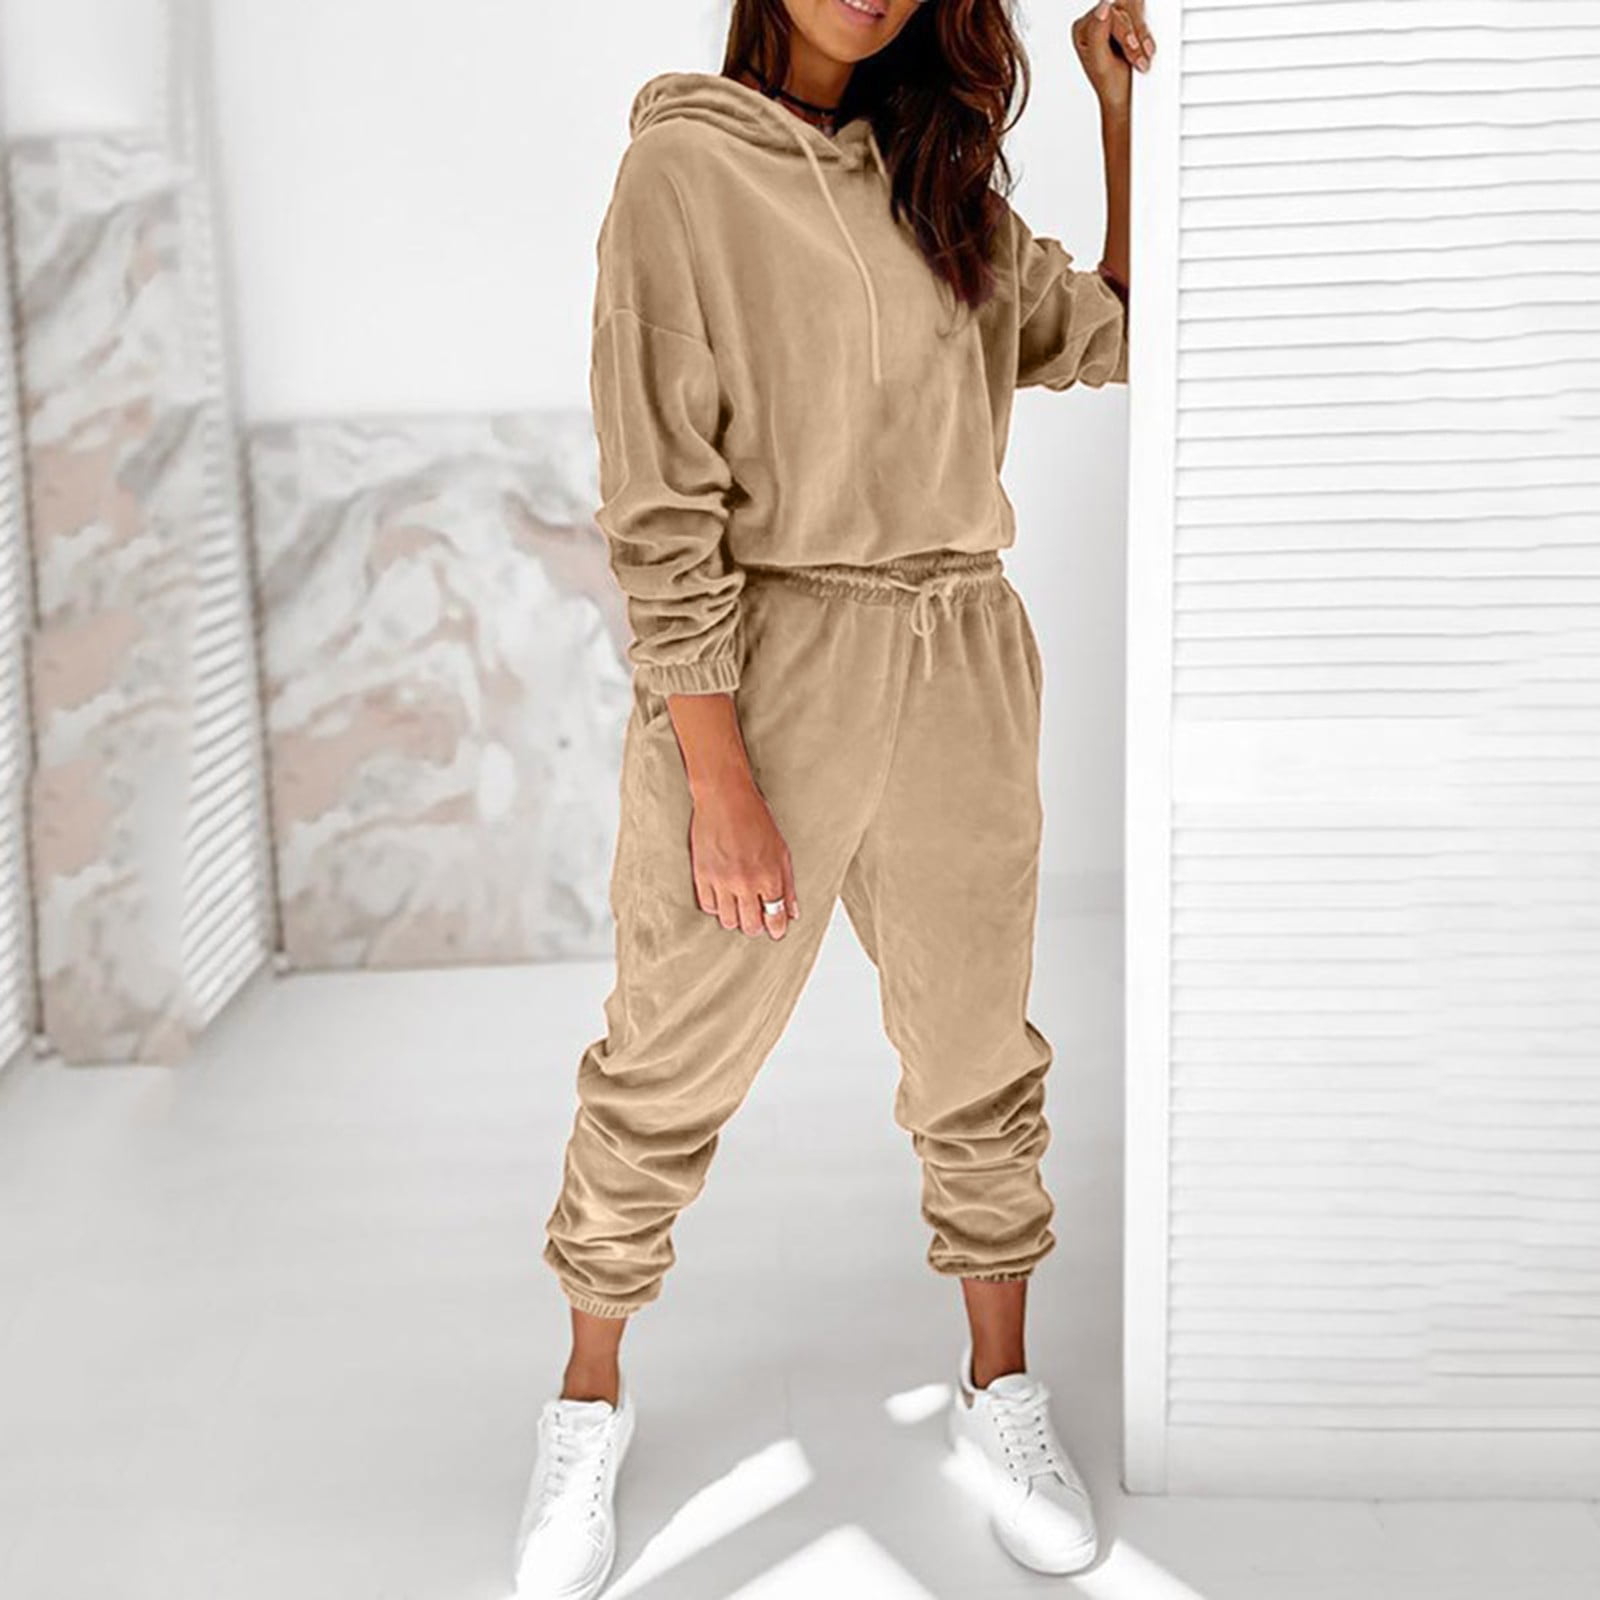 Durtebeua 90s Outfit For Women Casual Sports Hoodies Sweatsuit Sweatpants  Jogger Winter Outfits for Ladies 